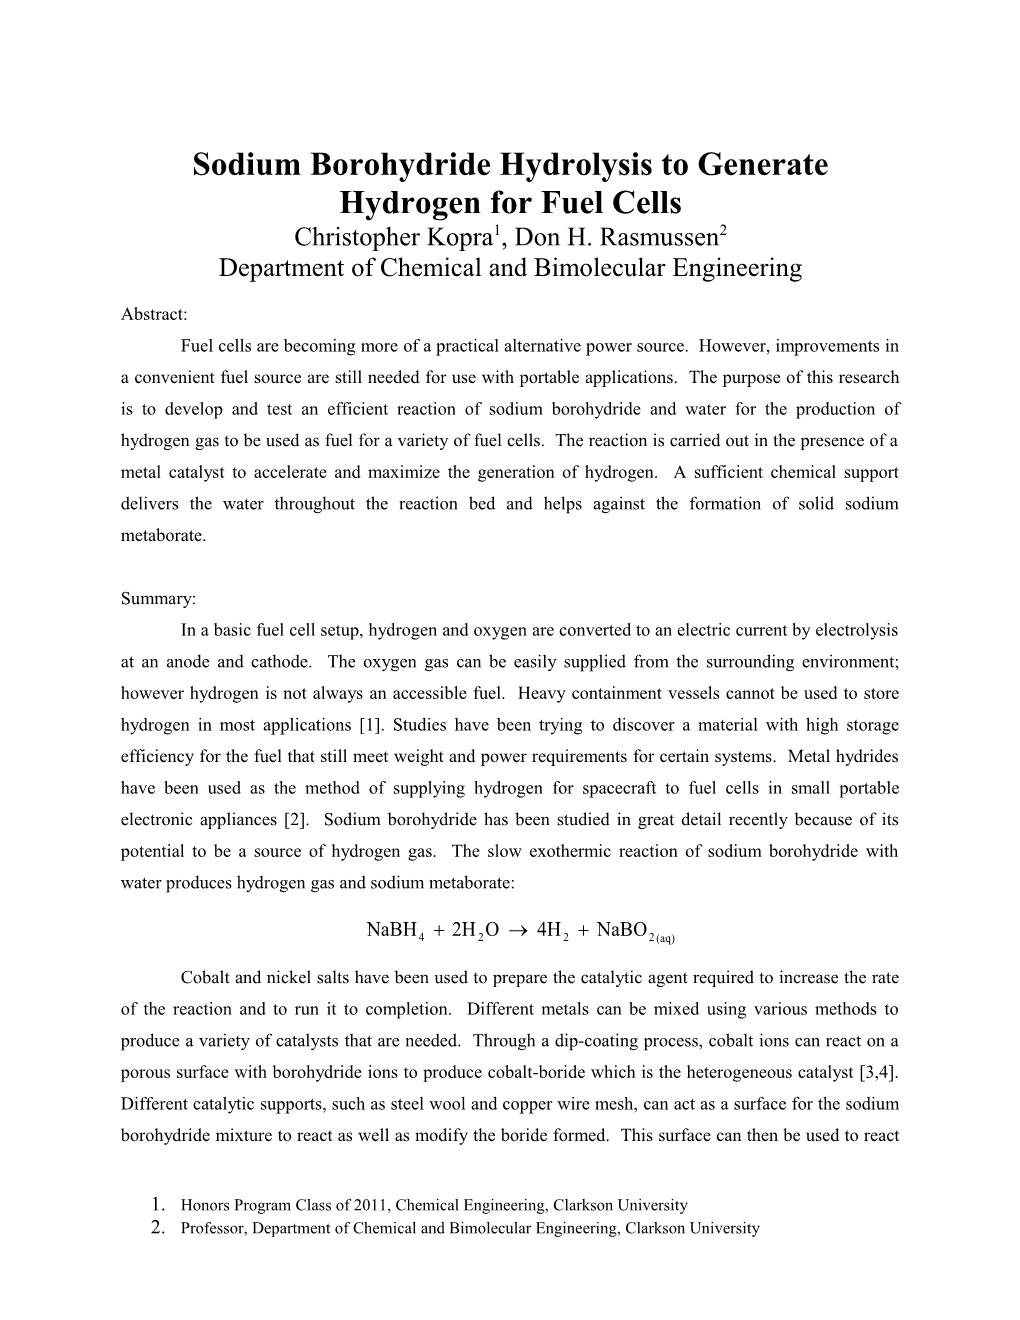 Sodium Borohydride Hydrolysis To Generate Hydrogen For PEM Fuel Cells